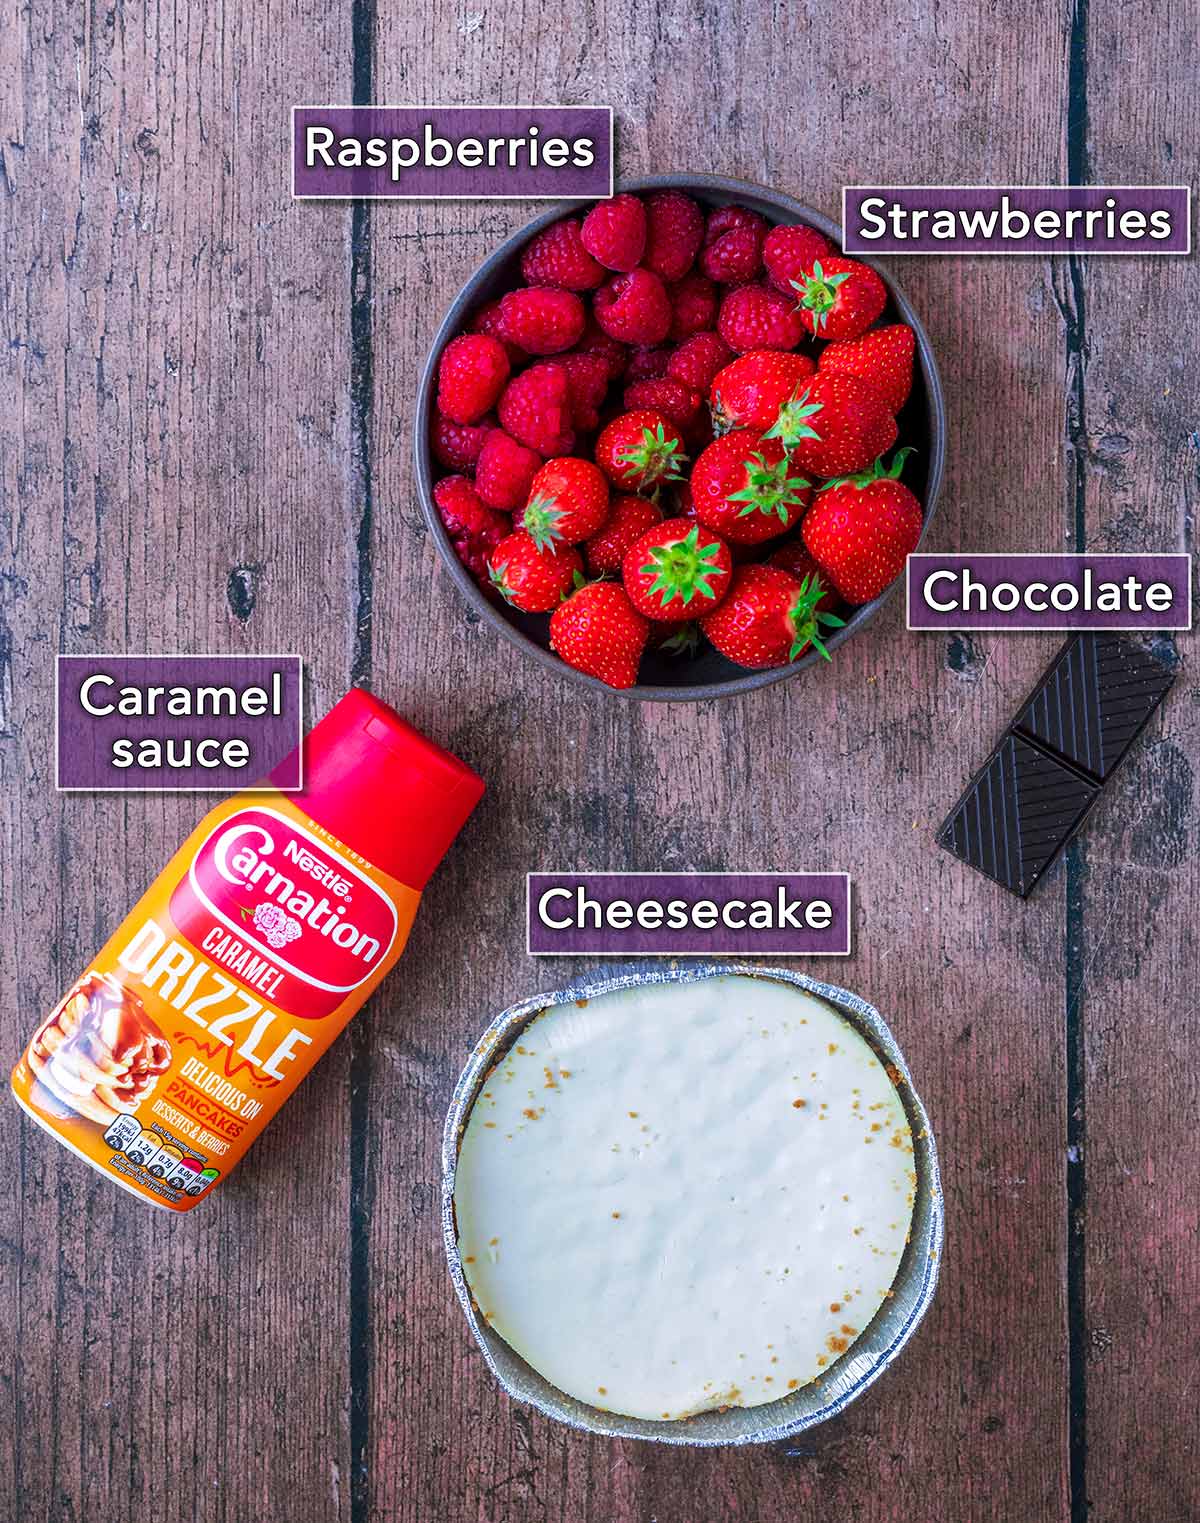 All the ingredients for this recipe with text overlay labels.